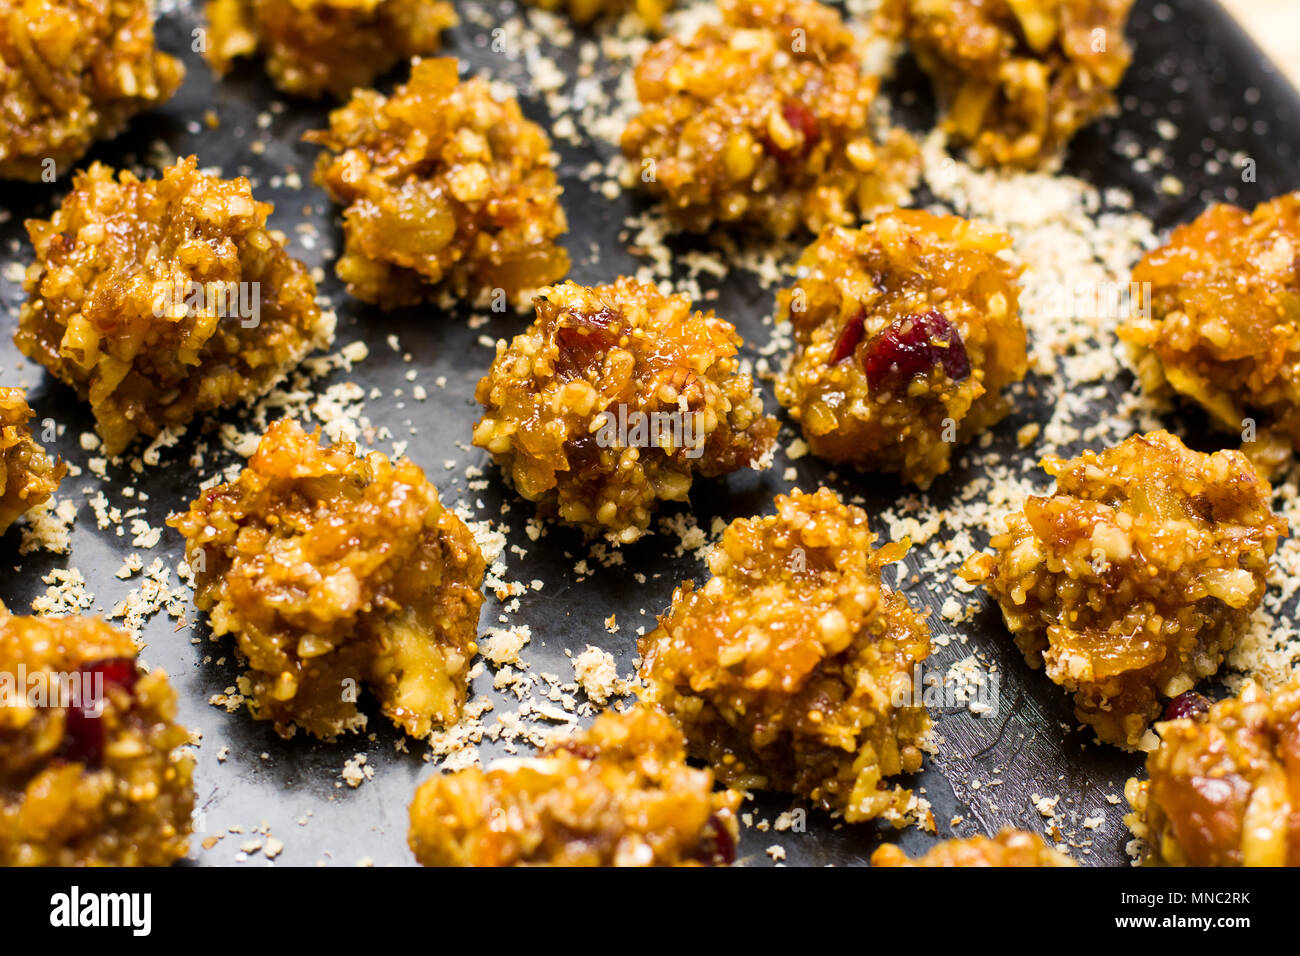 Bunch of crunchy homemade dessert cookies on a plate Stock Photo